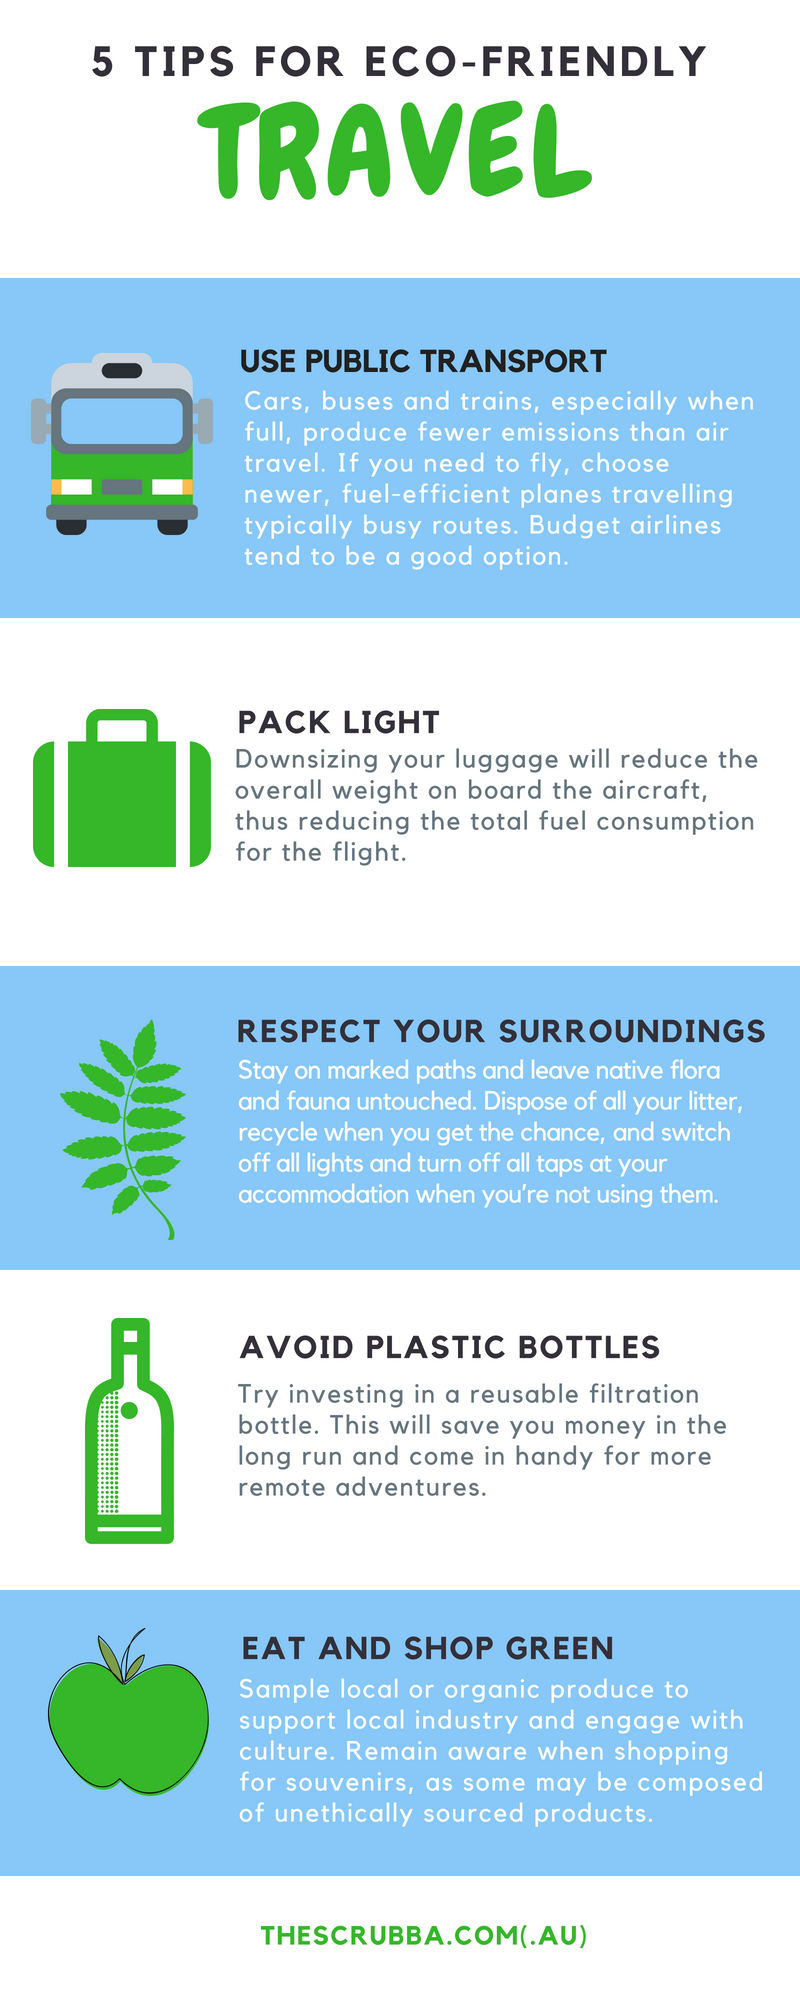 Tips for eco-friendly travel infographic